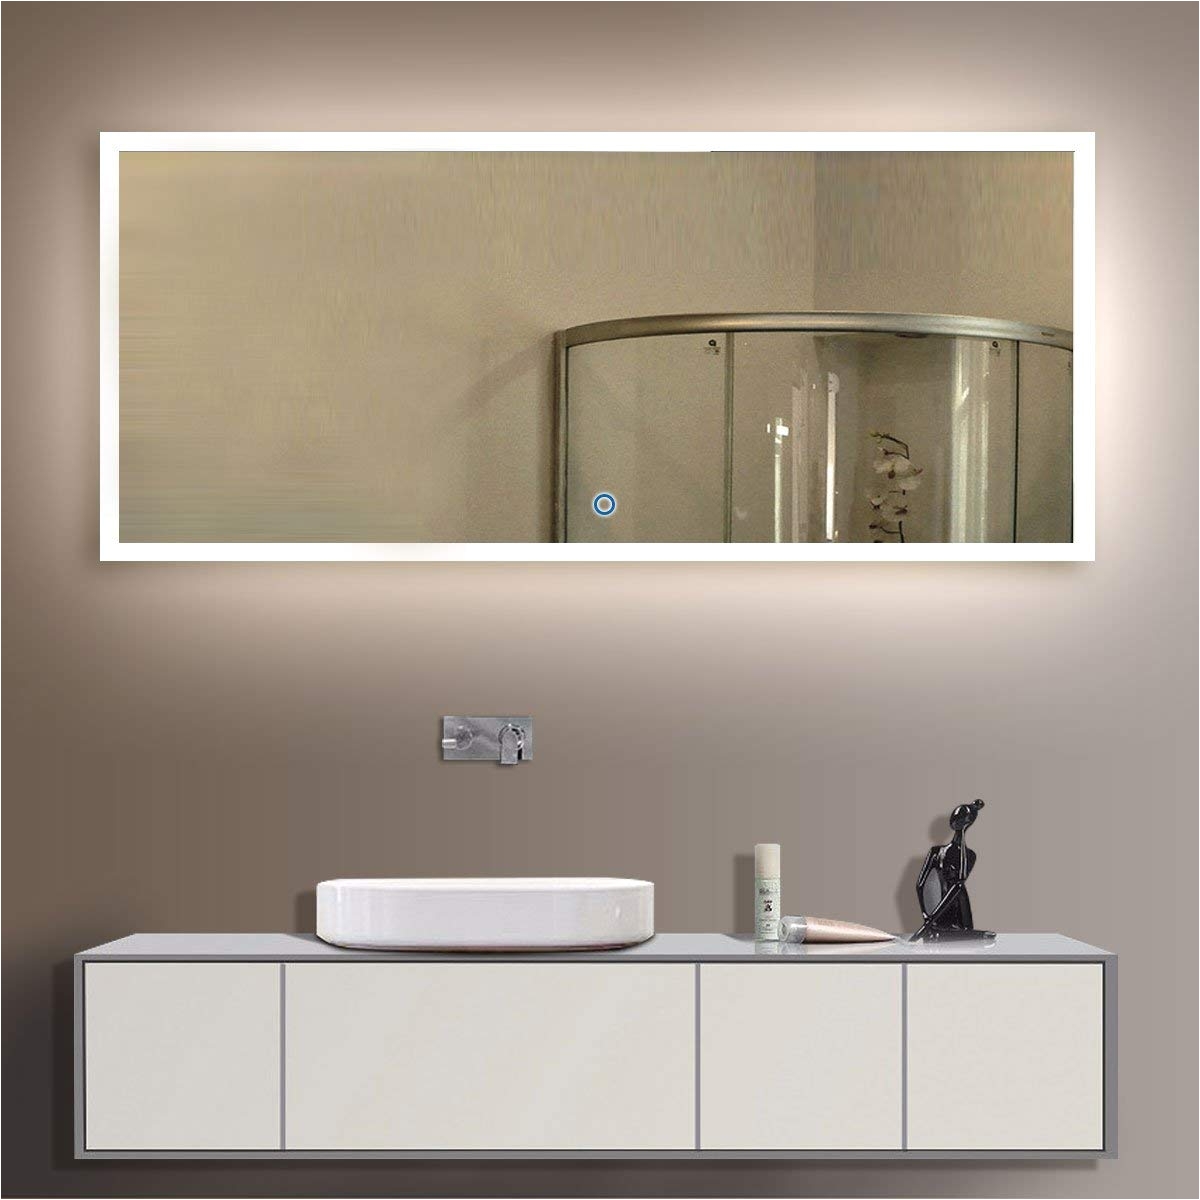 amazon com bhbl 84 x 40 in led backlit mirror wall mounted lighted makeup vanity mirror with touch button n031 a home kitchen